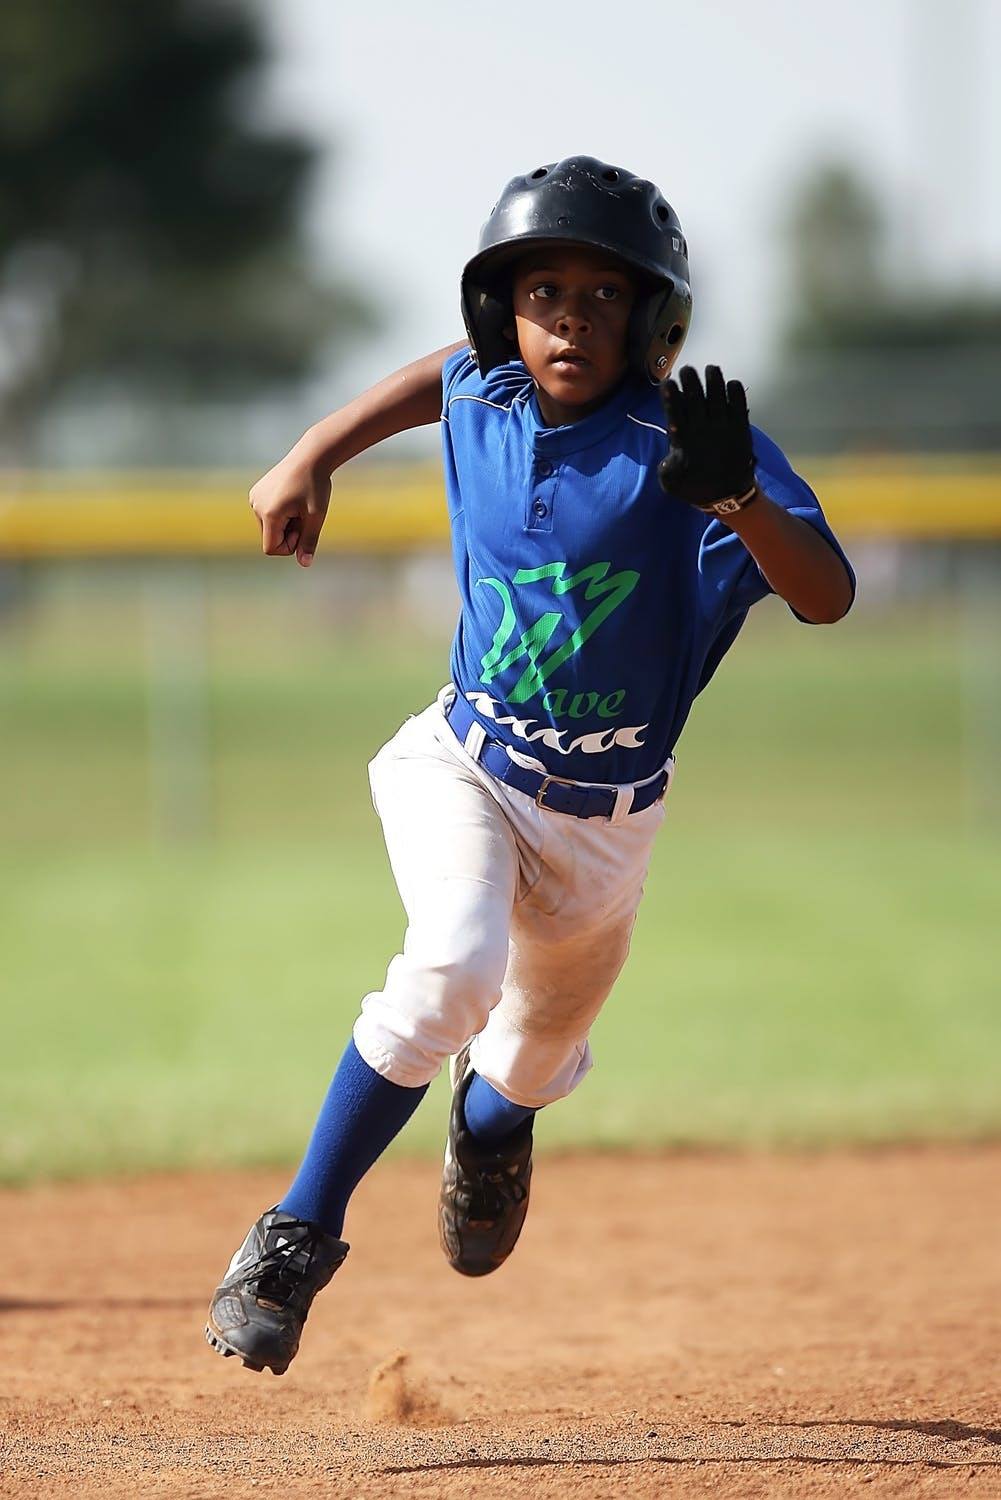 youth baseball player building confidence